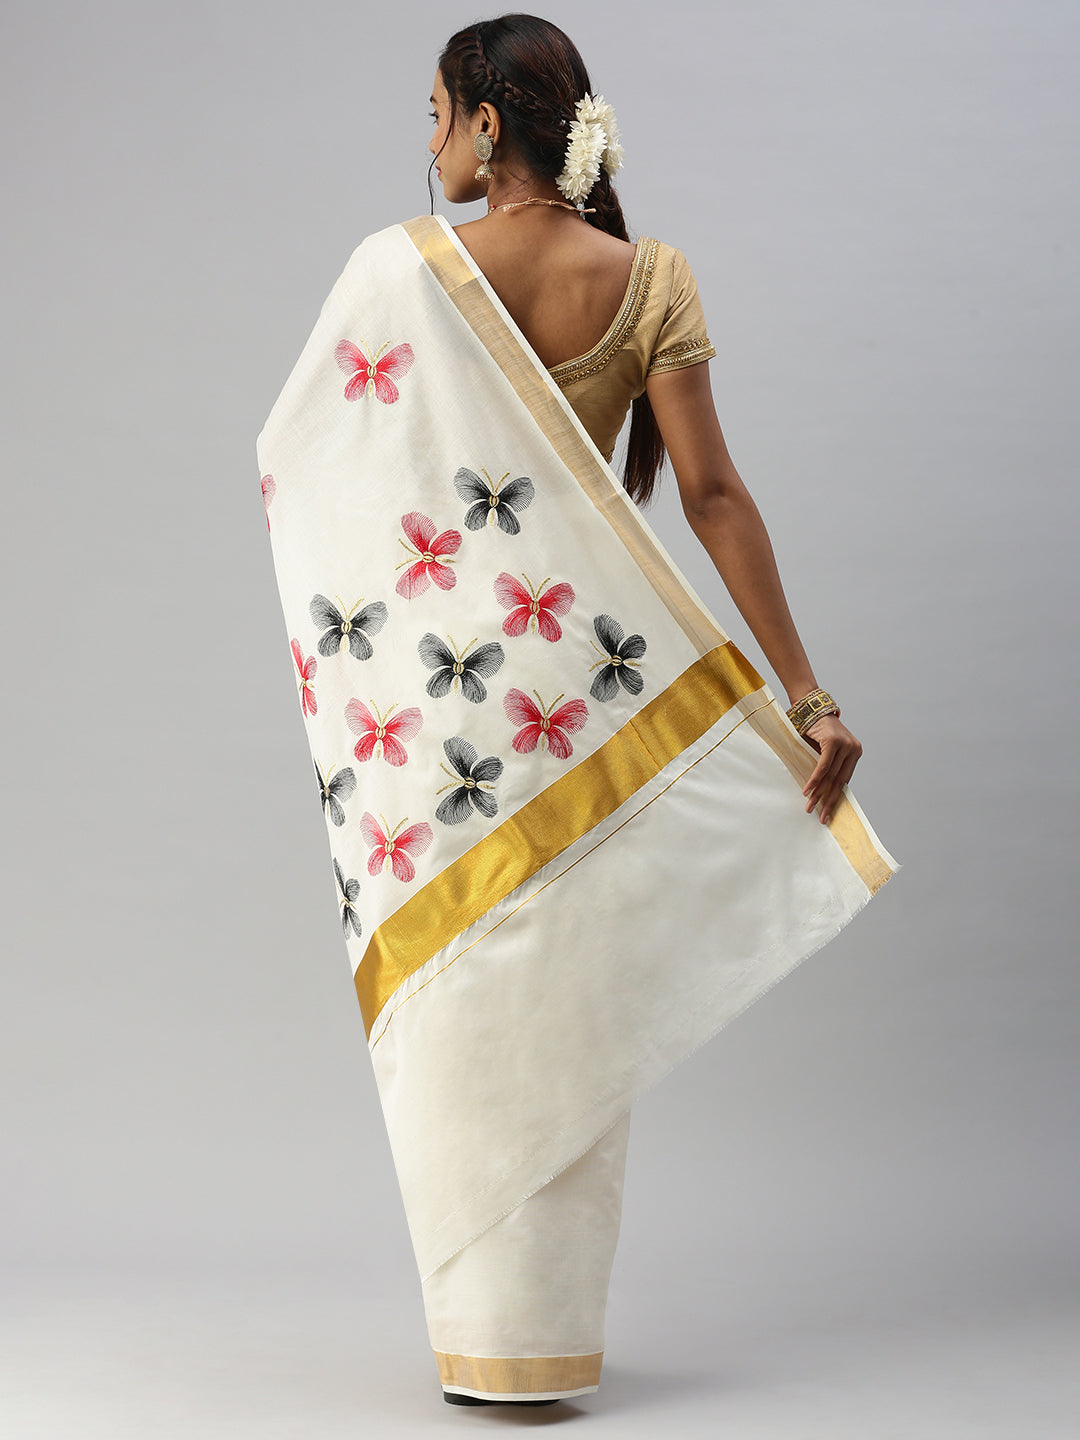 Kerala Cream Colorful Butterfly Embroidery Saree with Gold Zari Border KS83-Back view